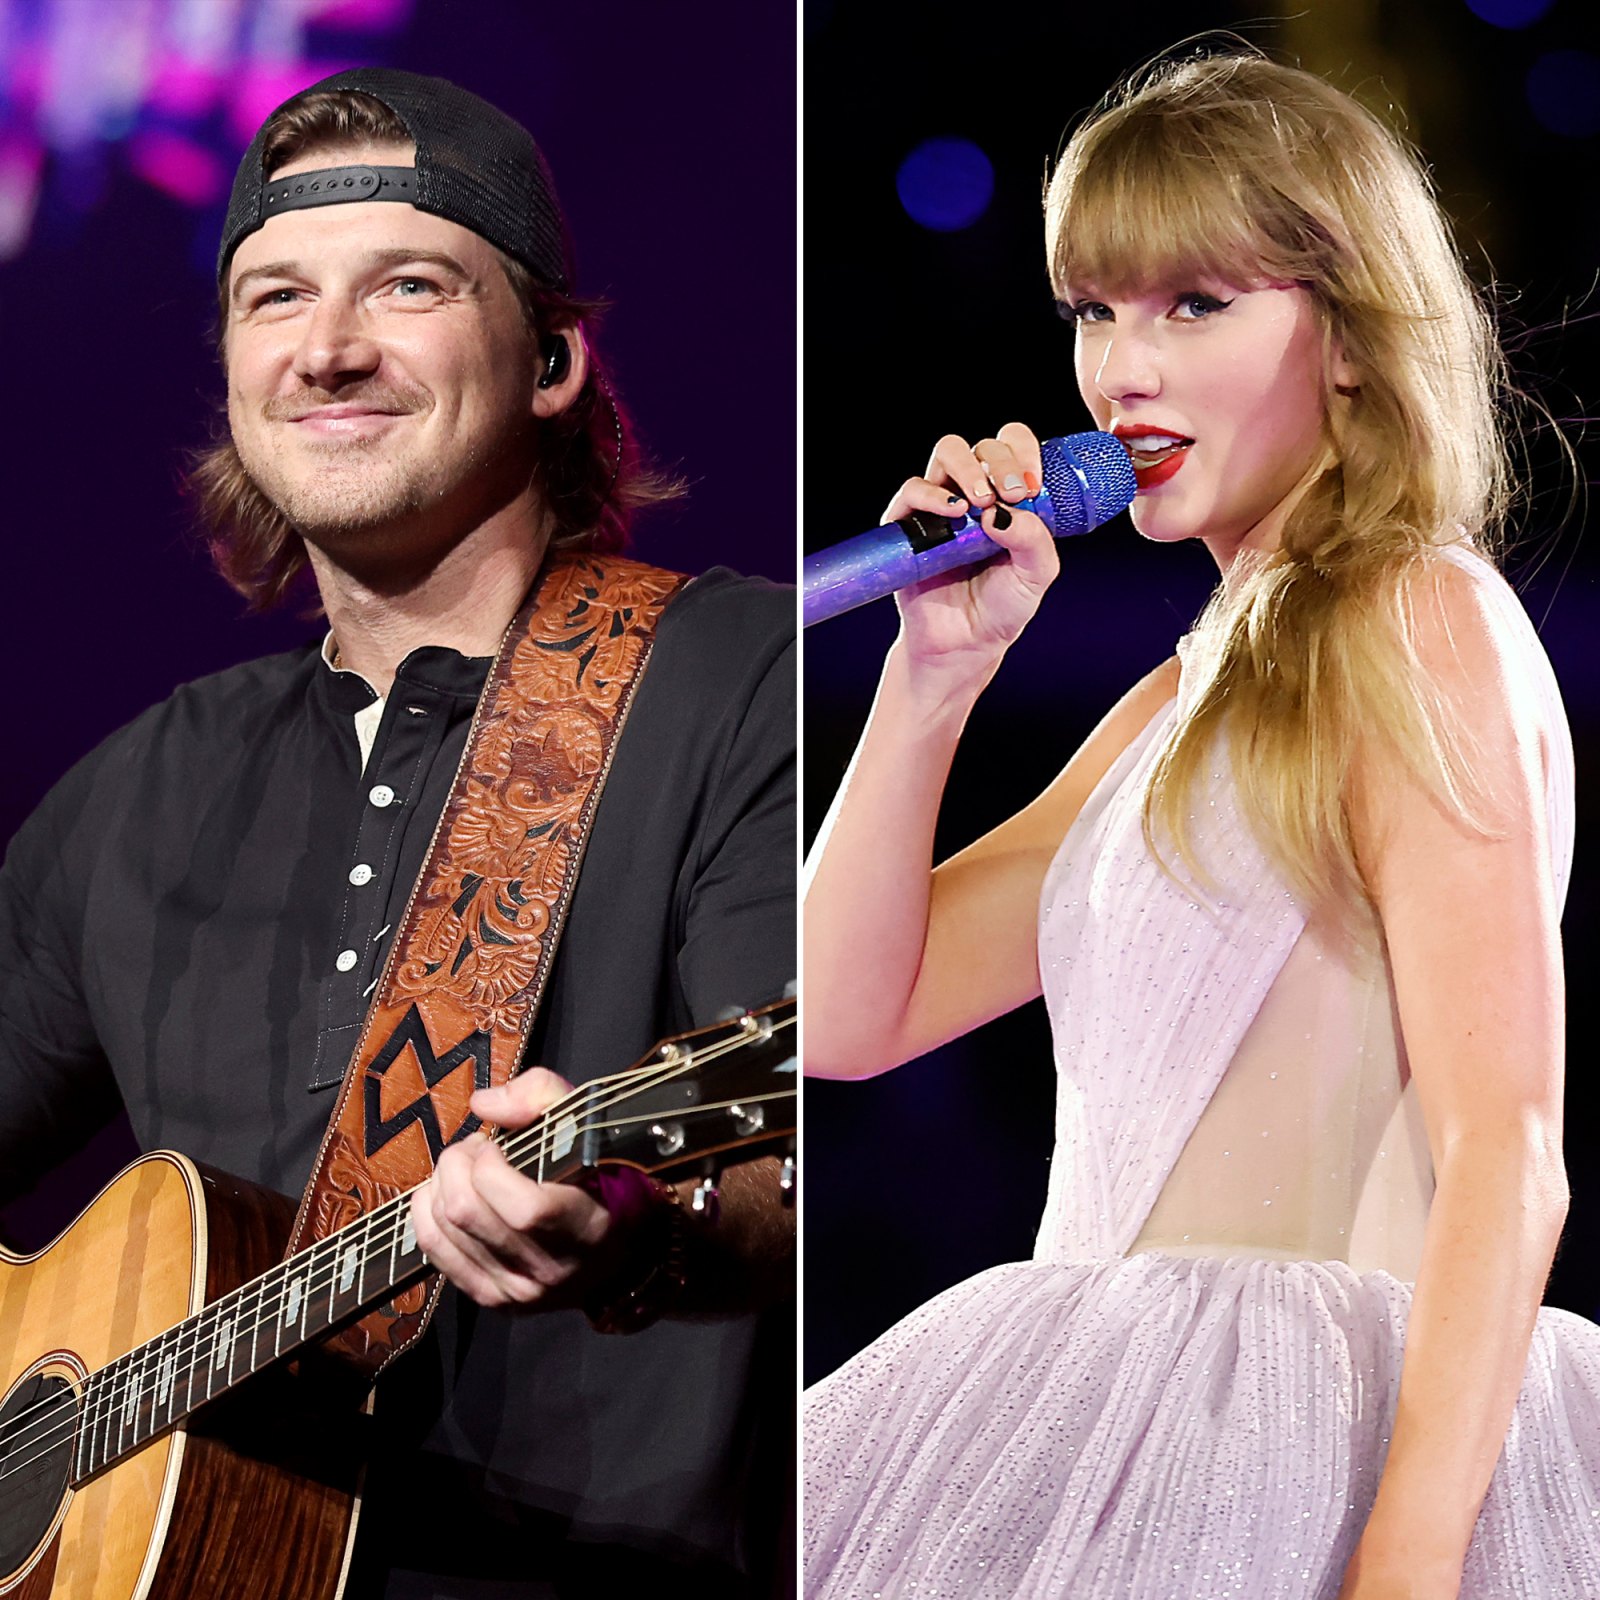 Morgan Wallen Advises Fans Not to Tease Taylor Swift After Making Remarks at Concert: ‘We Don’t Need to Do That’